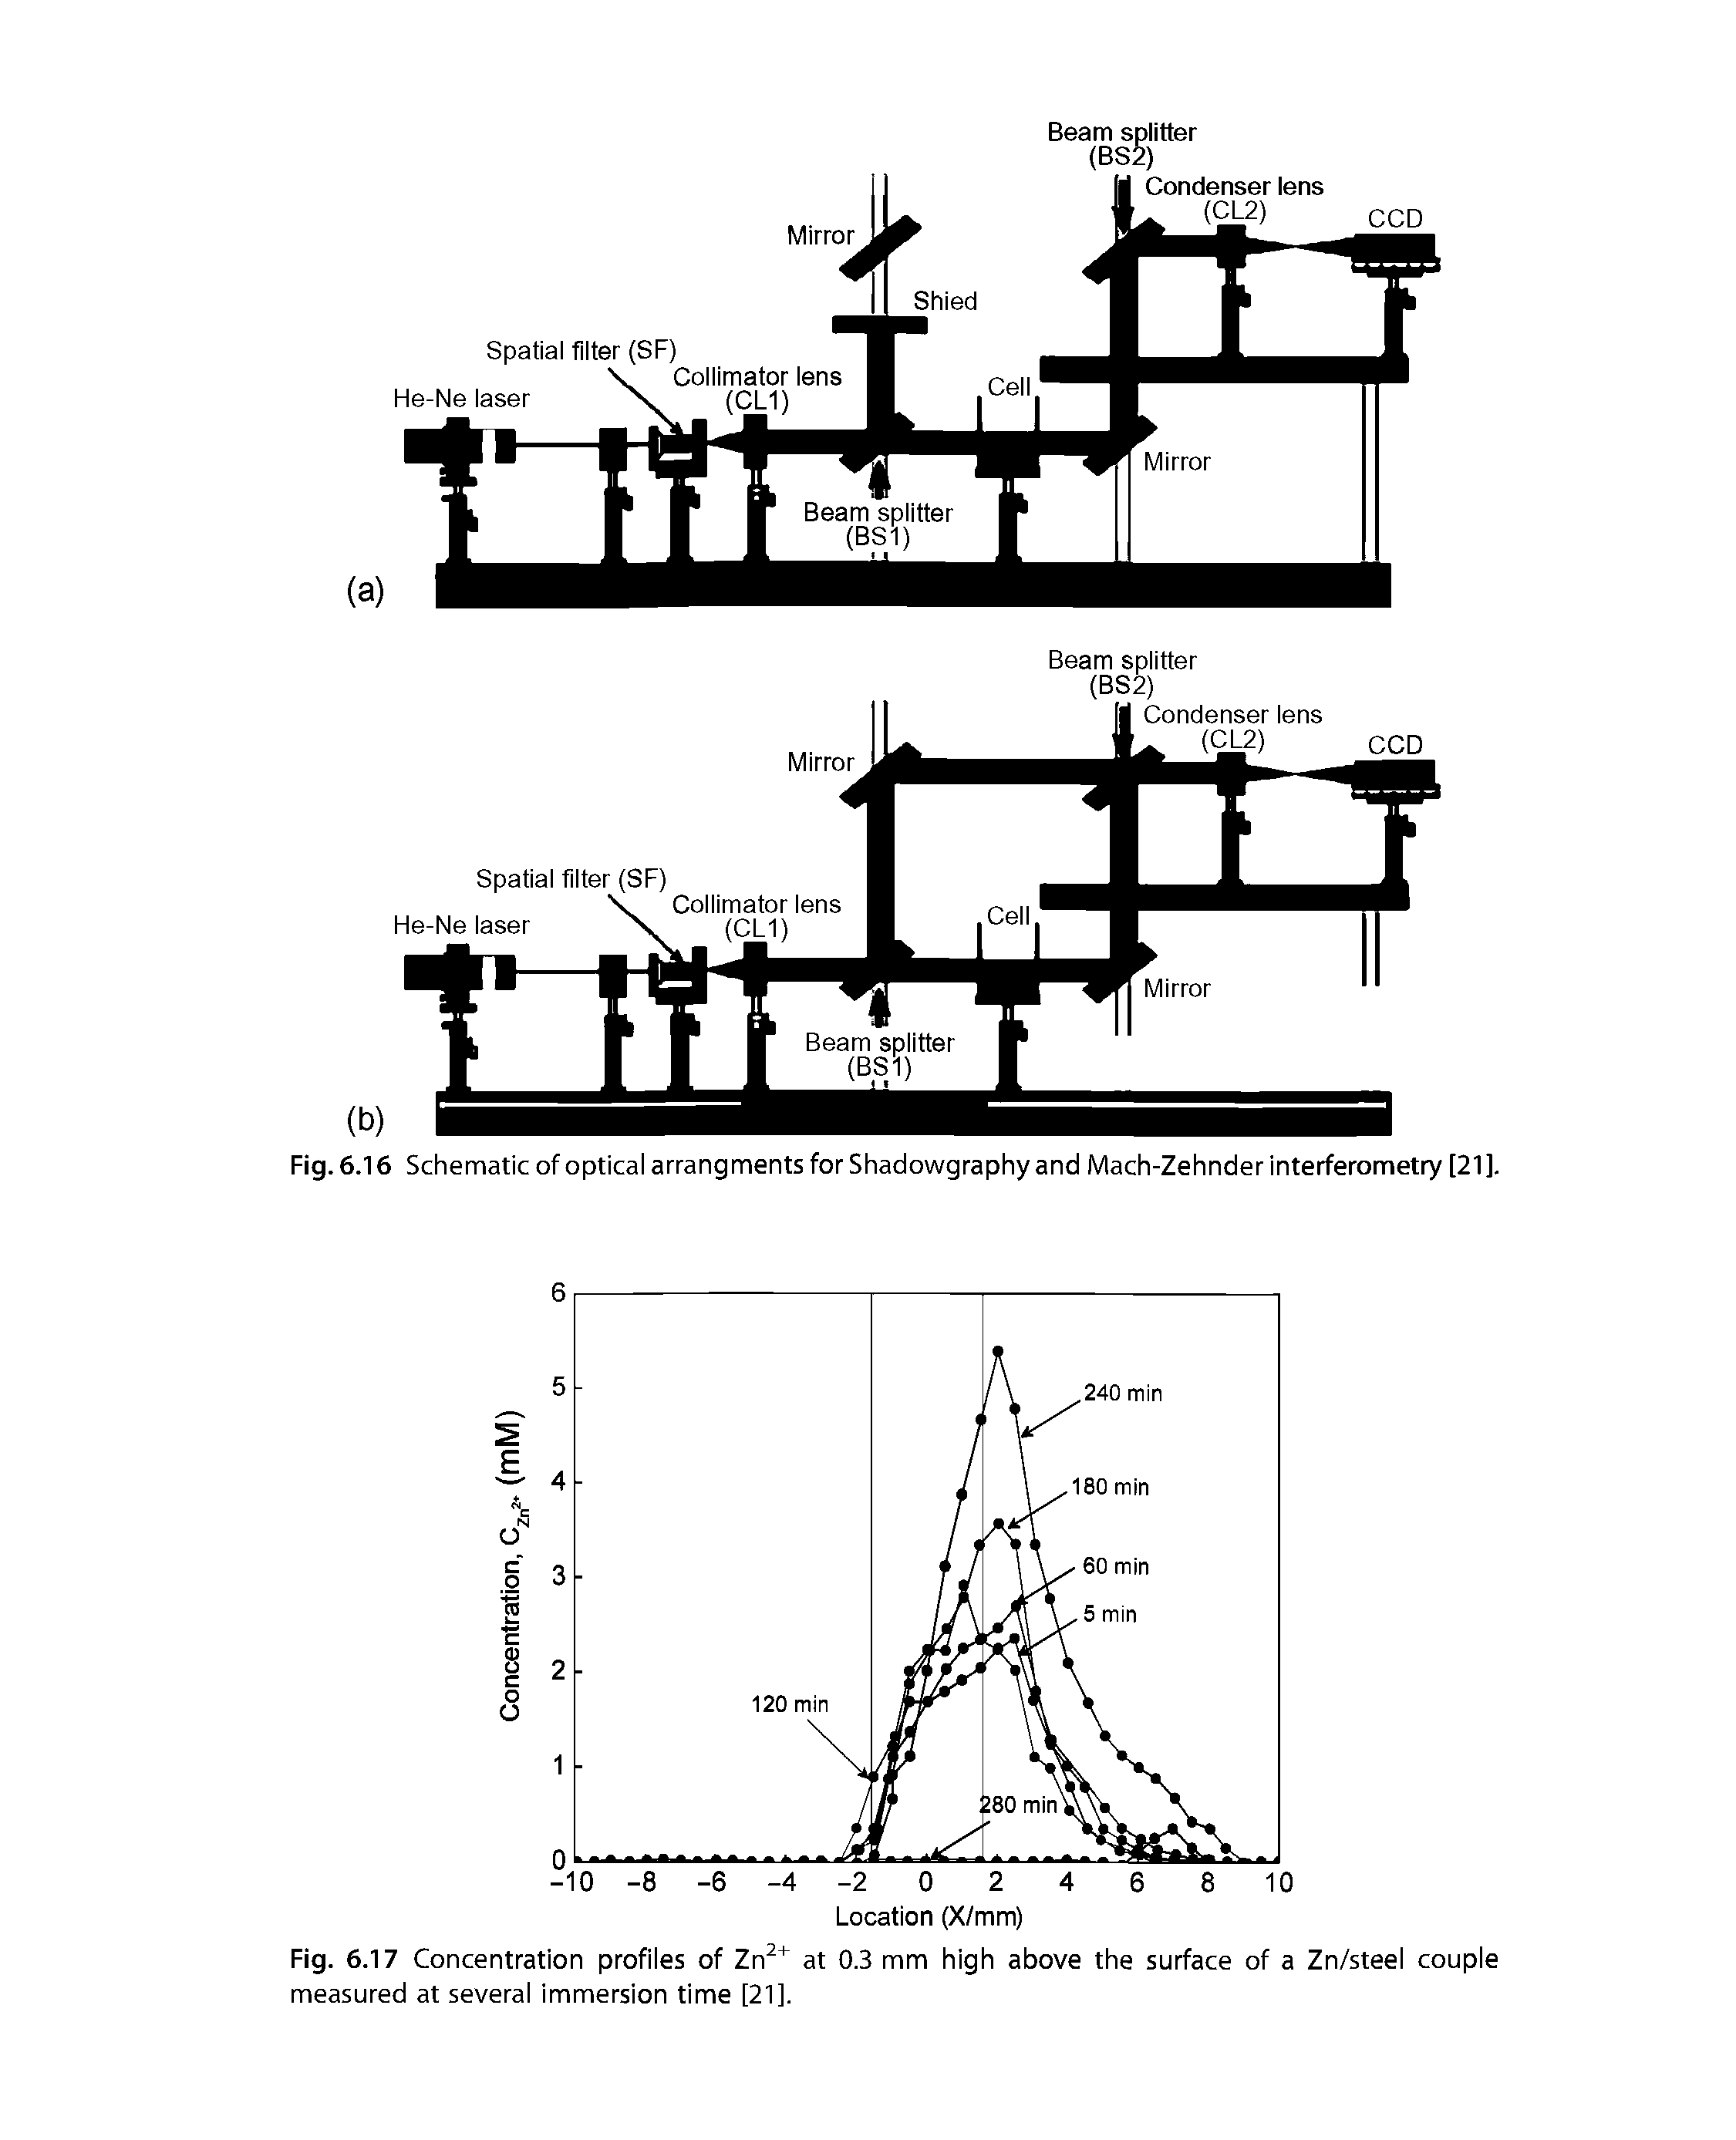 Fig. 6.16 Schematic of optical arrangments for Shadowgraphy and Mach-Zehnder interferometry [21].